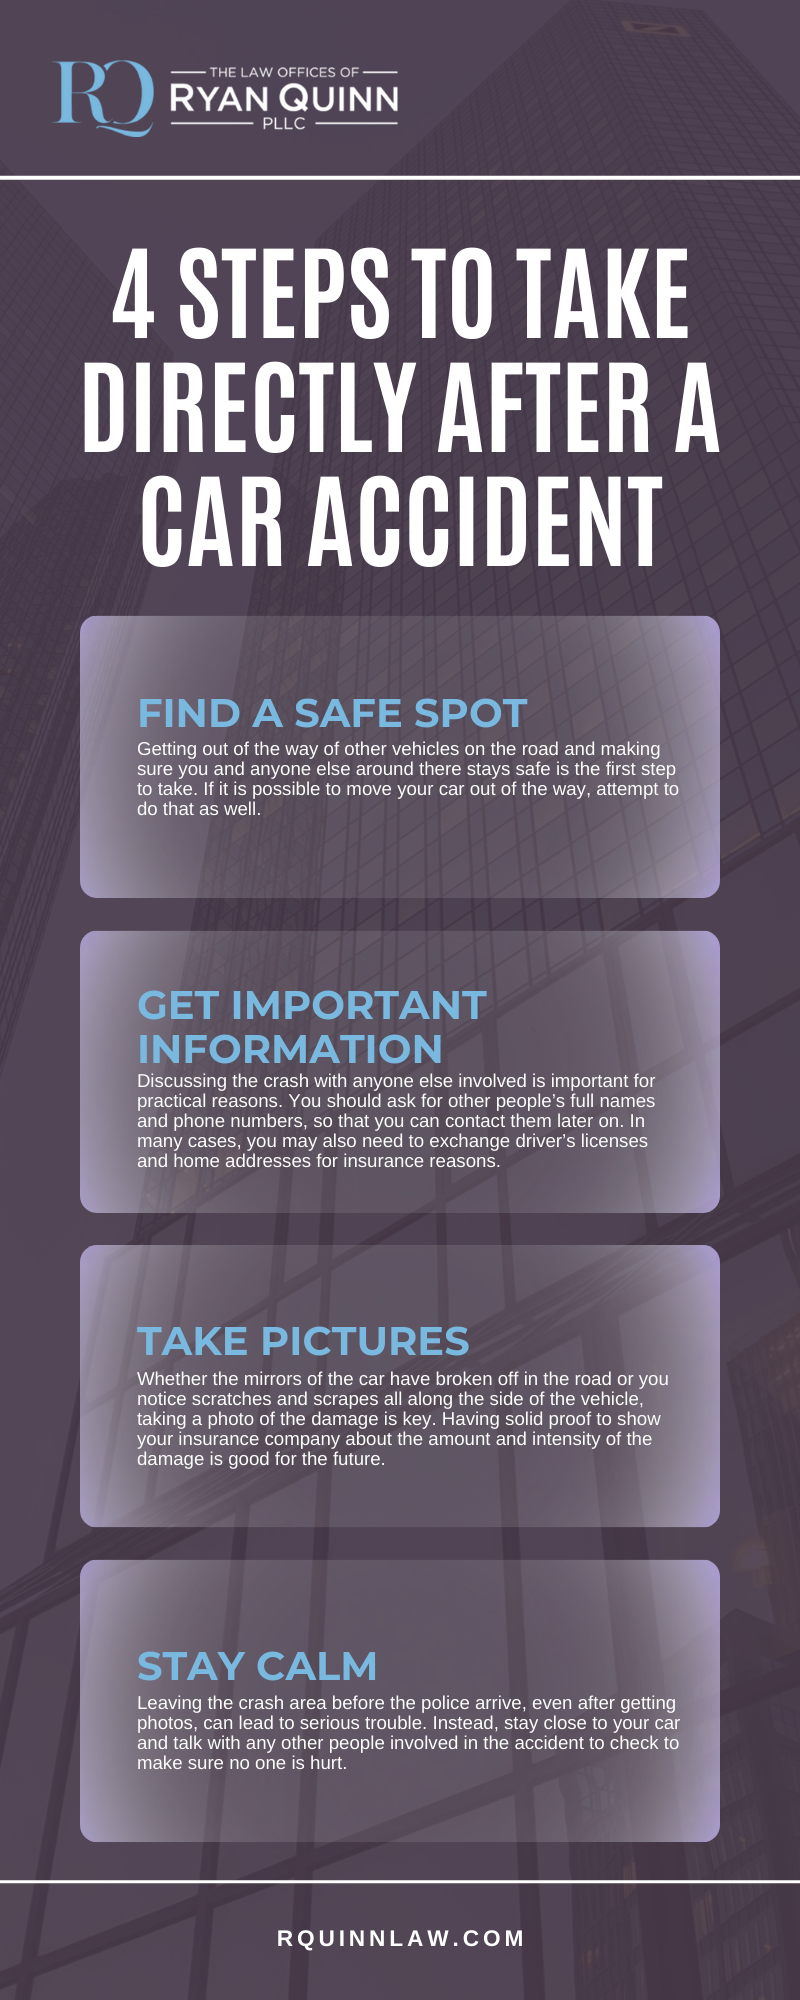 4 Steps To Take Directly After A Car Accident Infographic